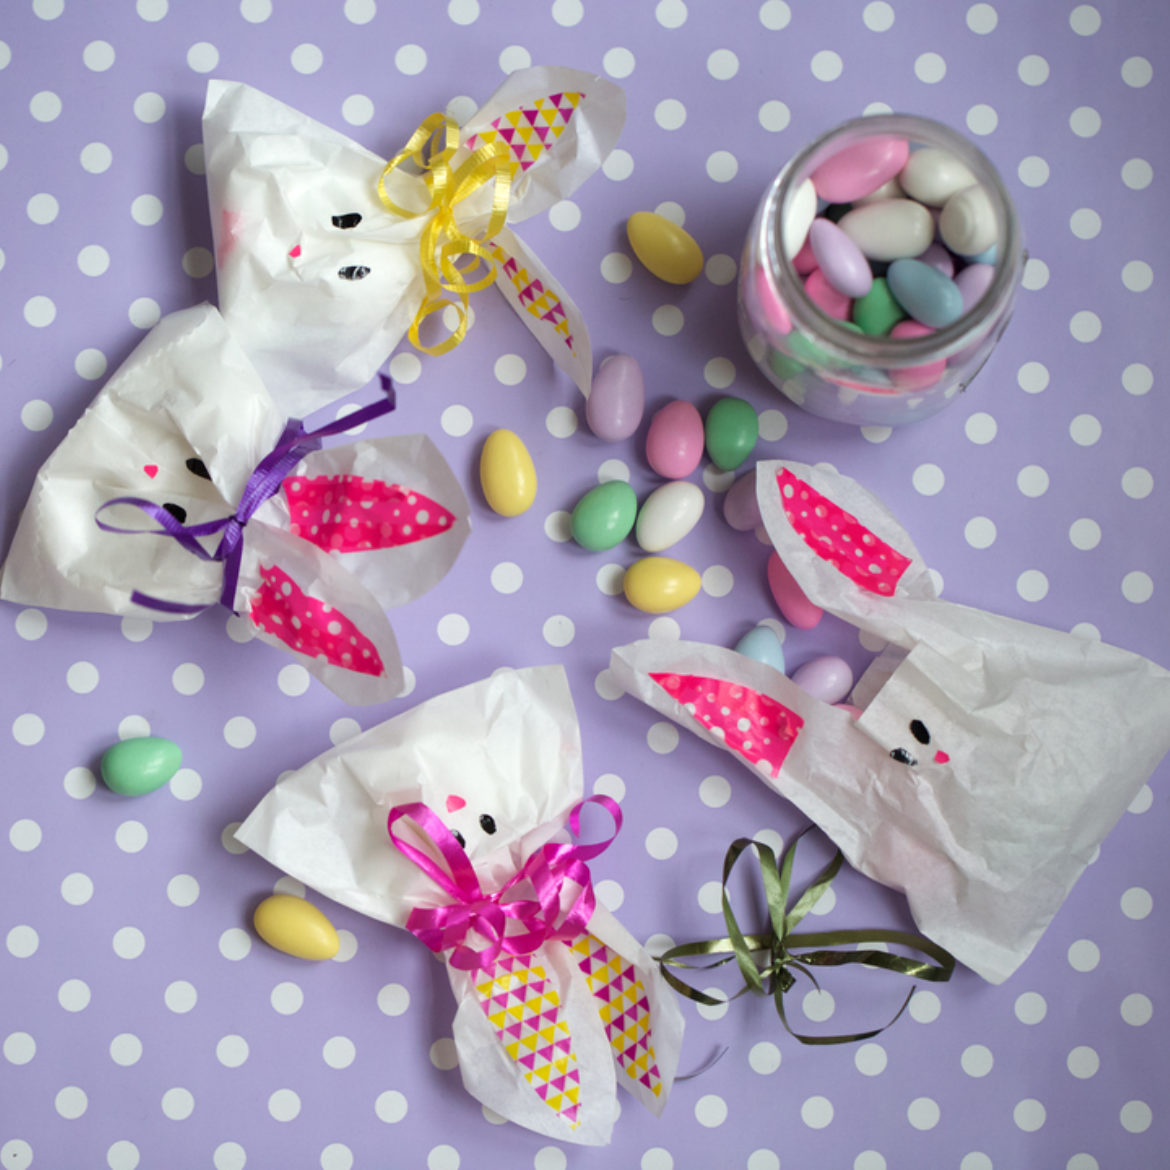 Completed Duck Tape® Bunny Treat Bag full of candy